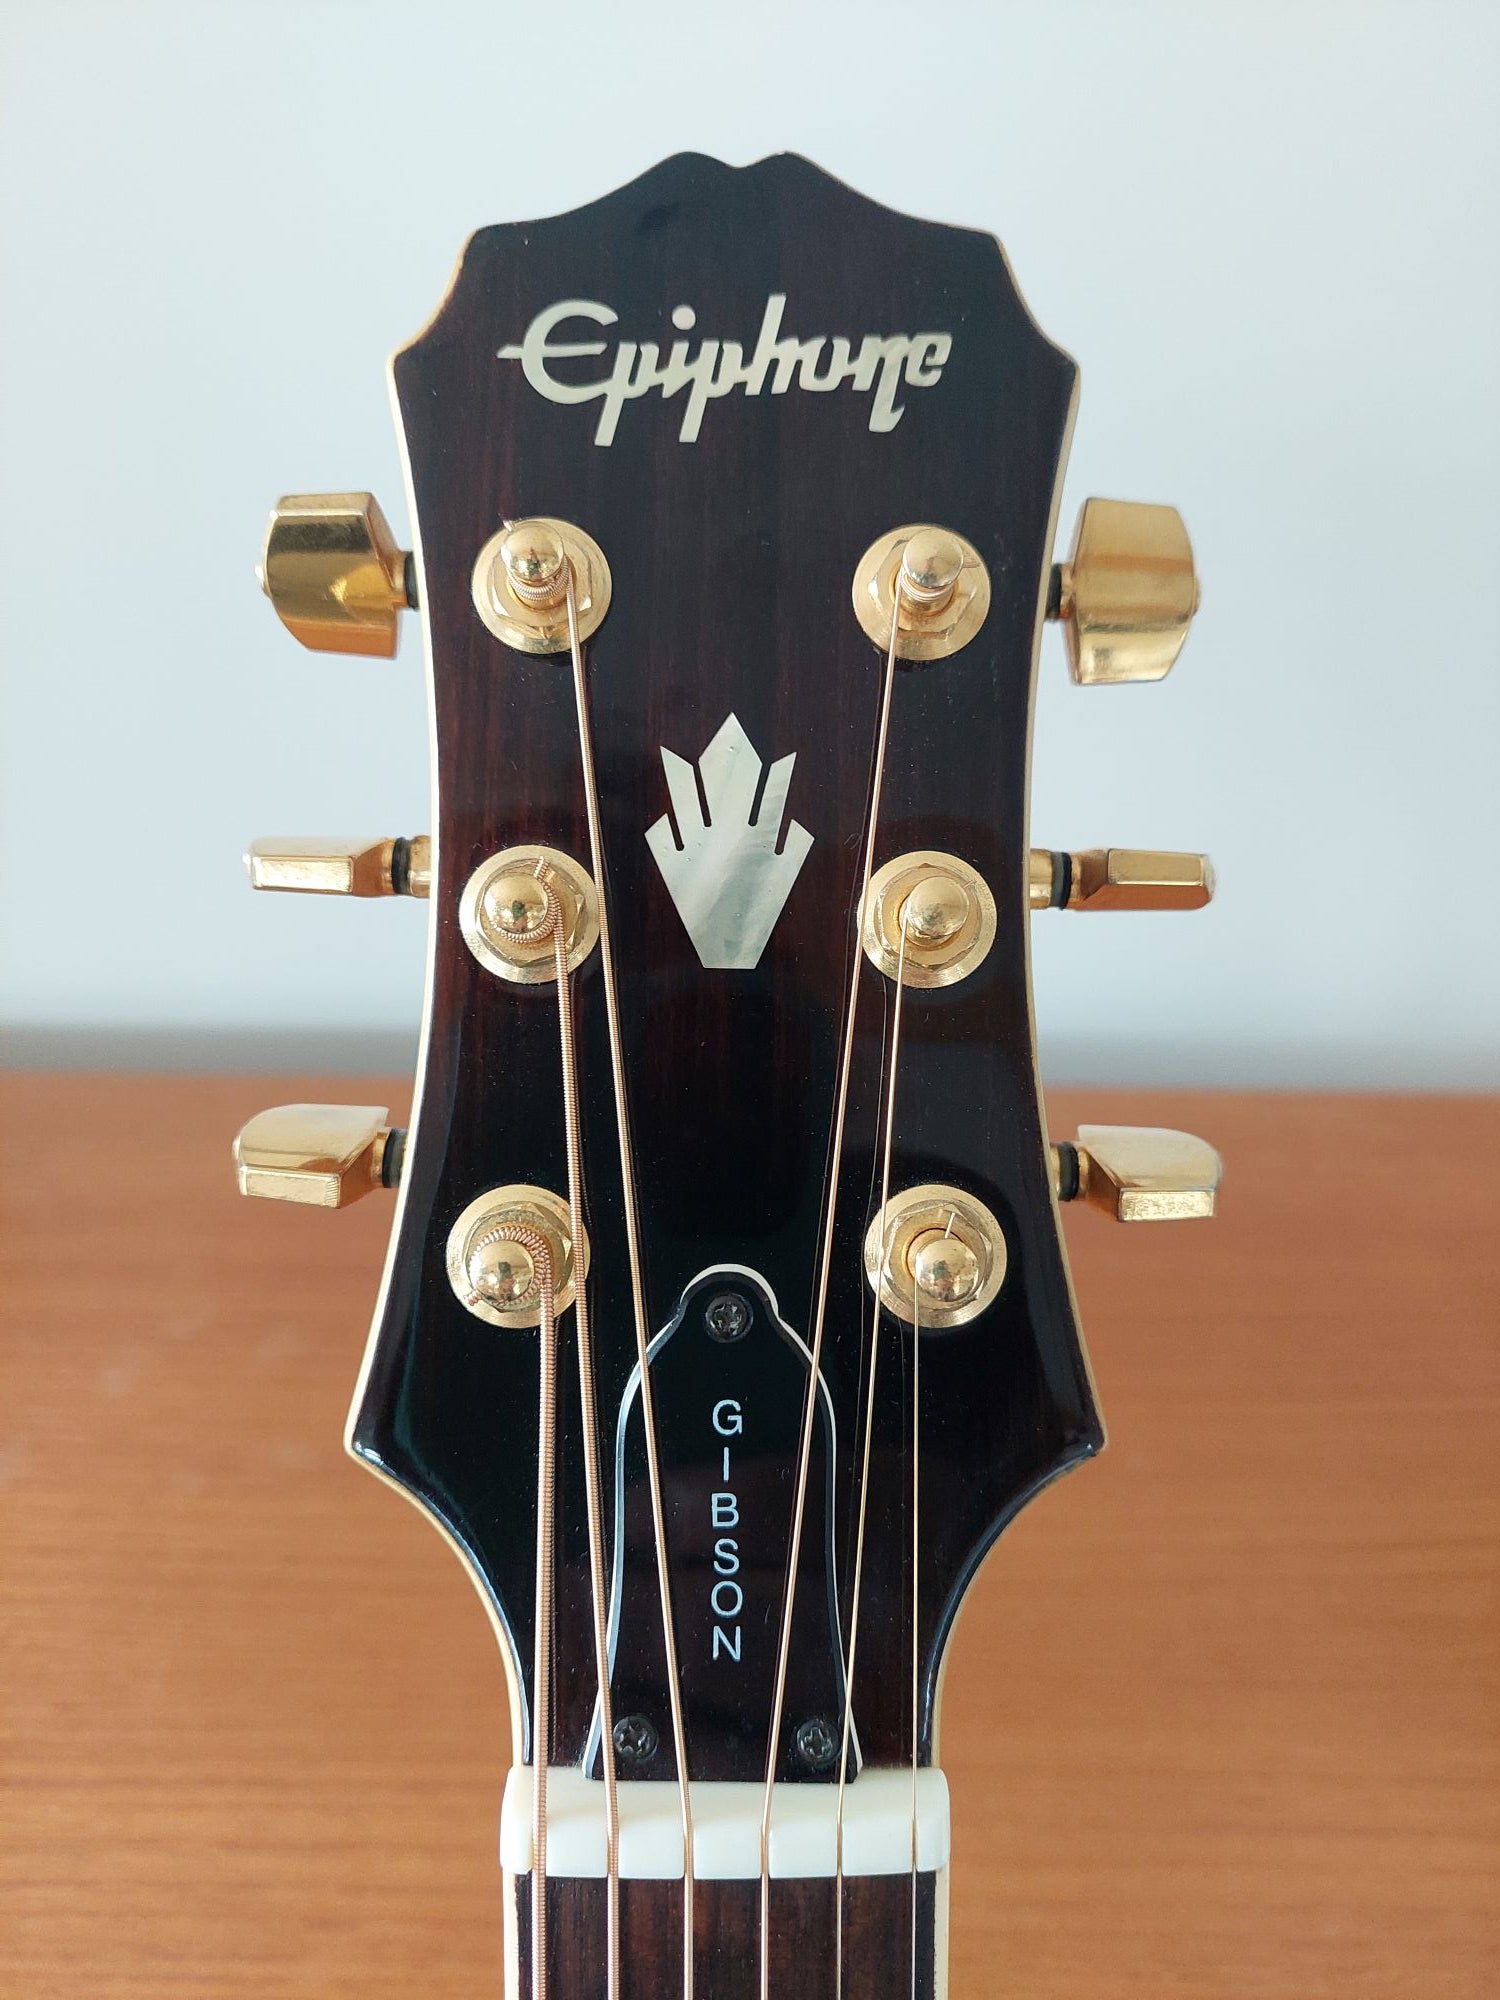 Pre-Owned 1994 Epiphone Acoustic PR 800S, by Gibson - Made in 